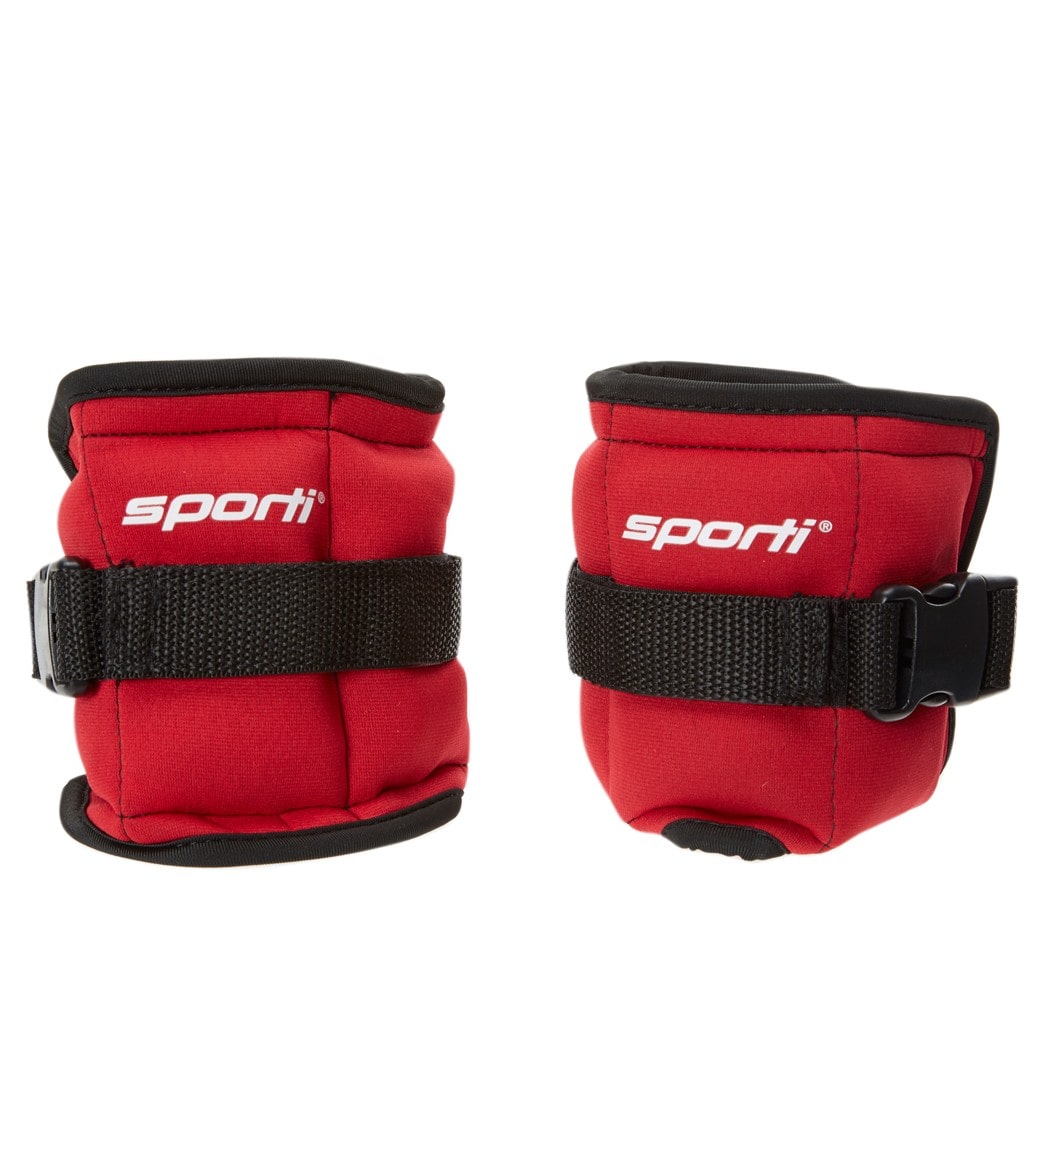 Sporti 3lbs Fitness Ankle Weights